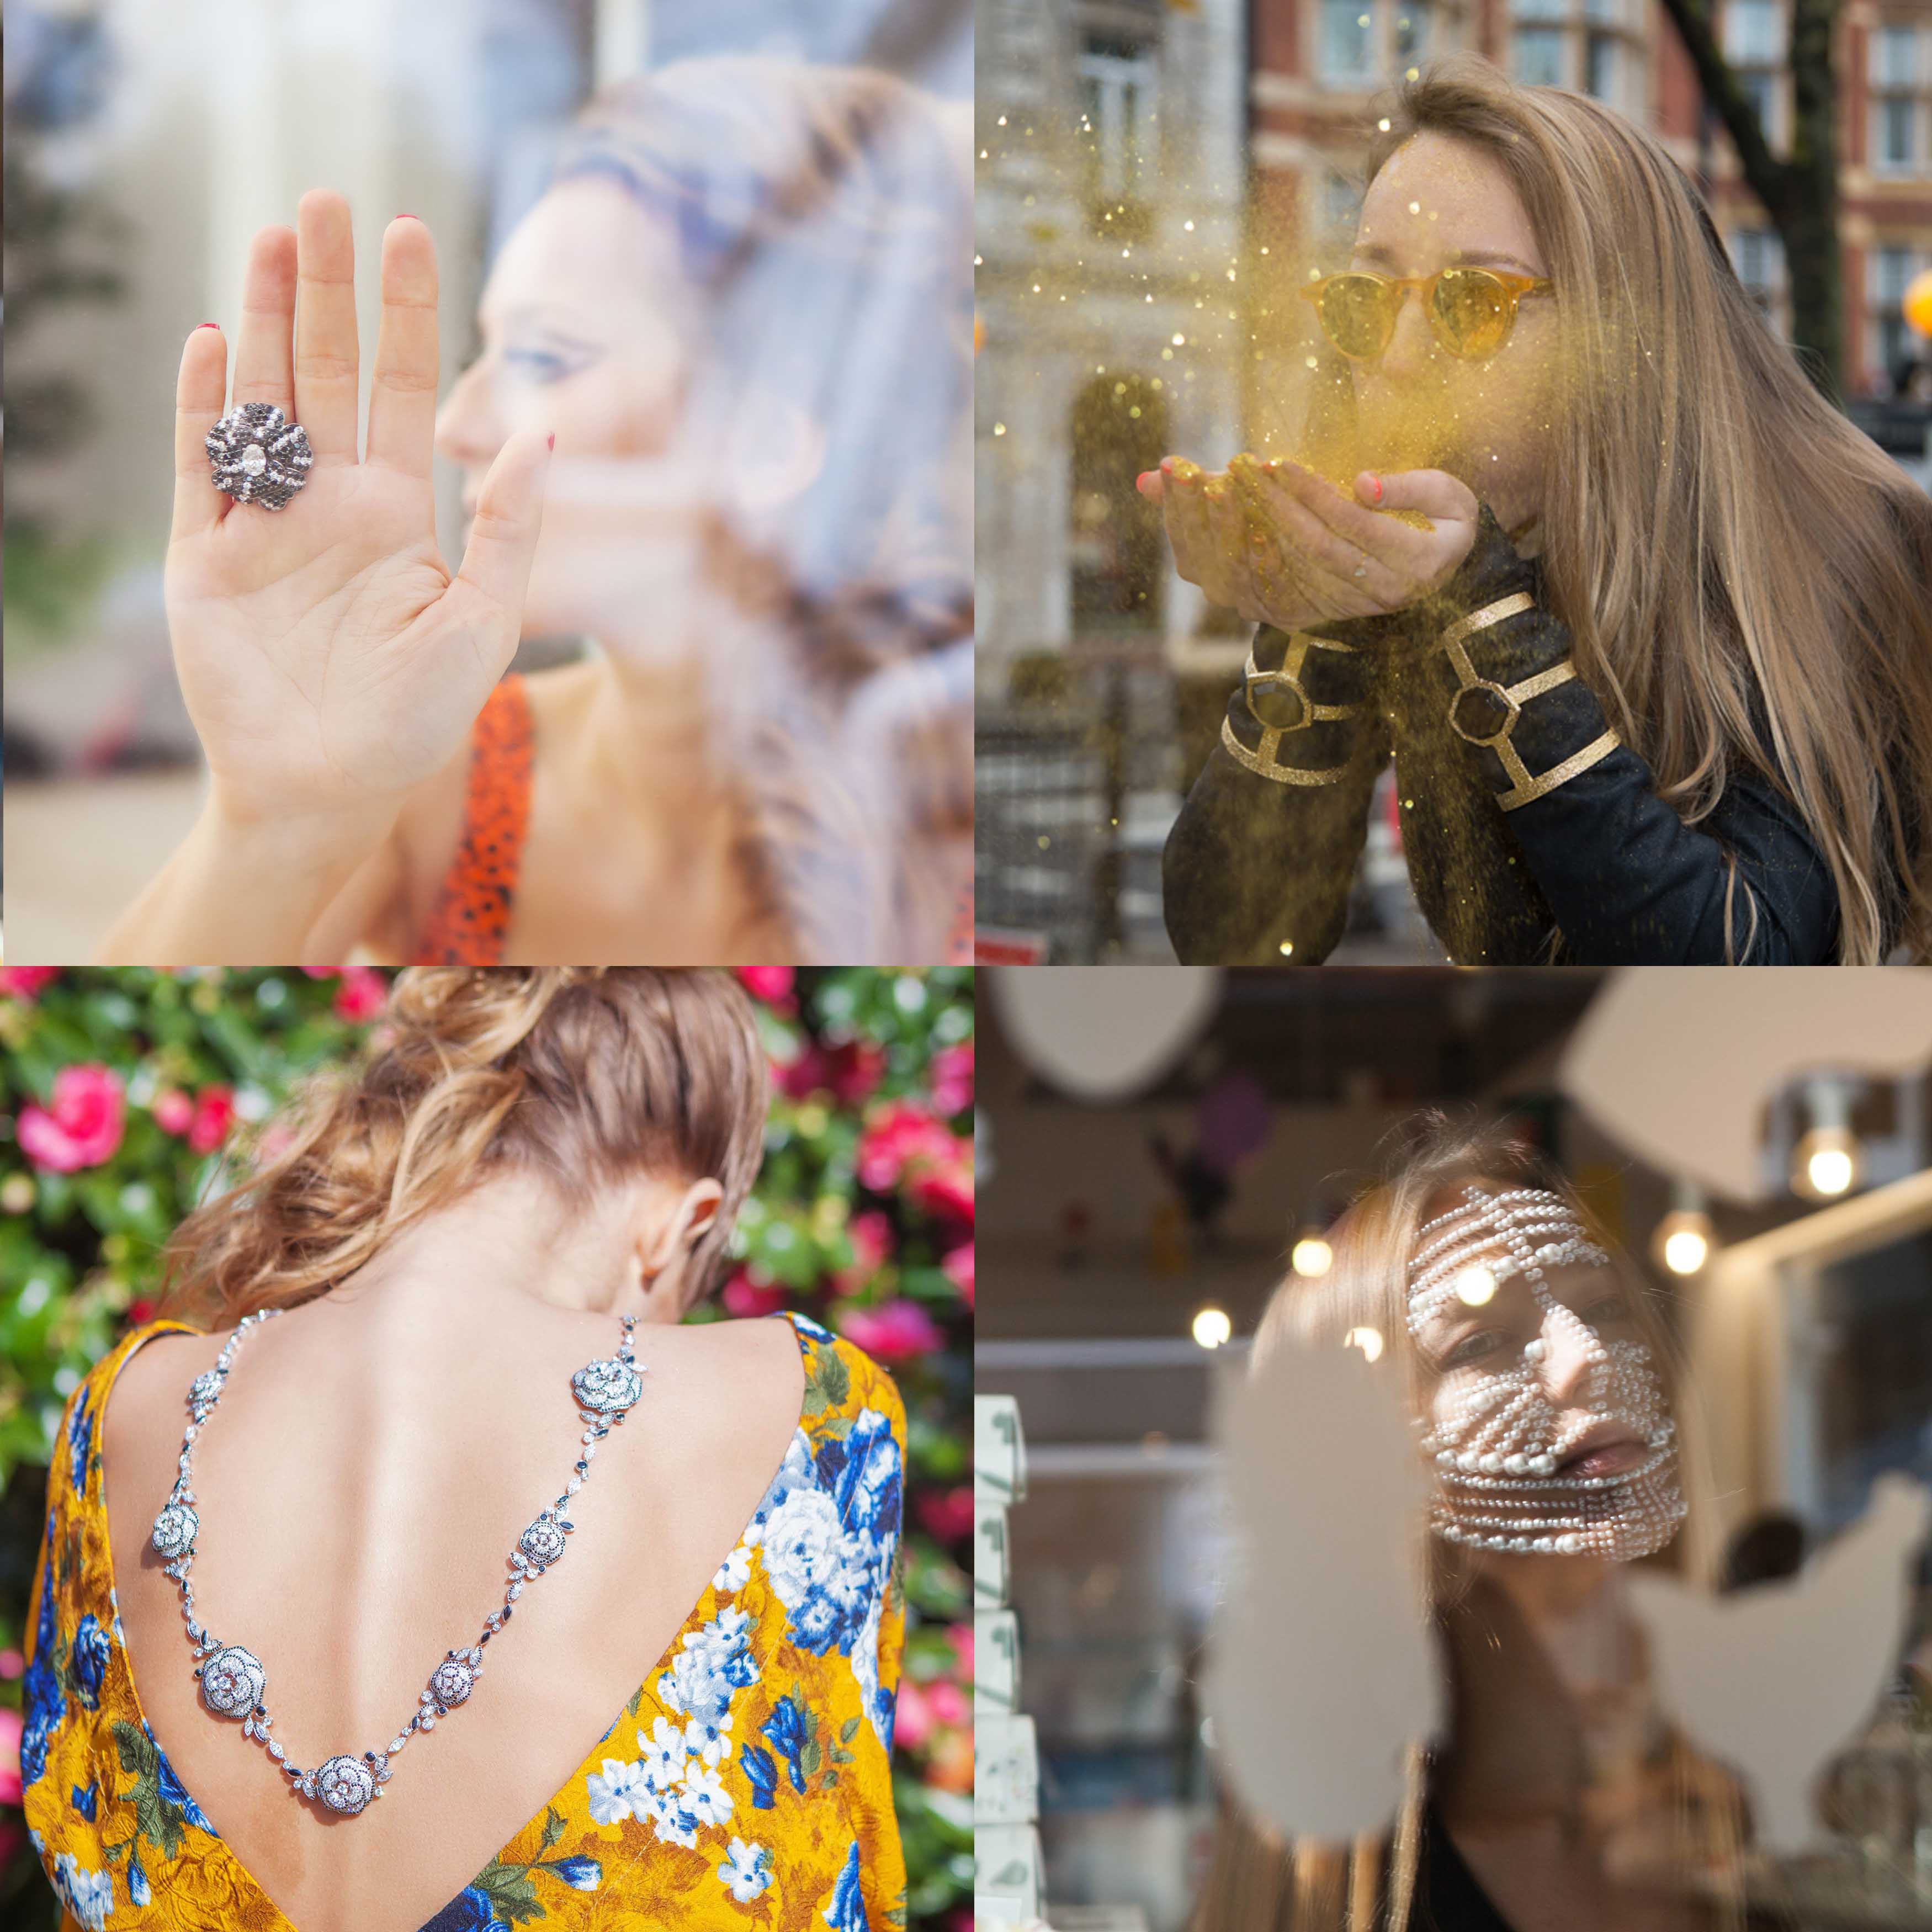 FOUR MUST WATCH GEMOLOGUE VIDEOS FOR JEWELLERY LOVERS